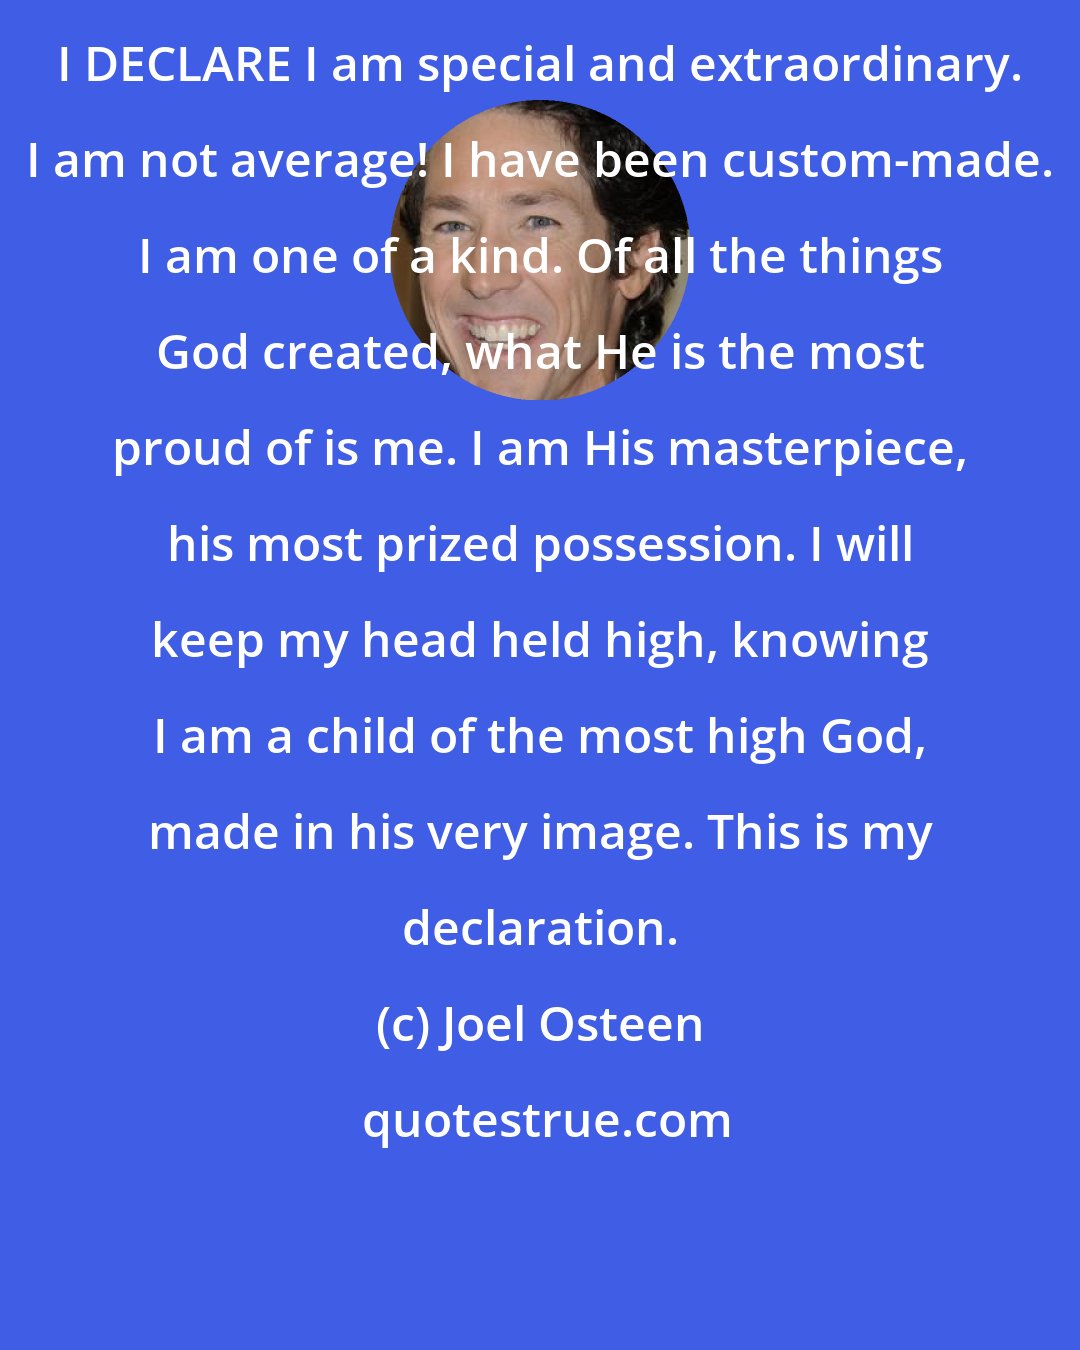 Joel Osteen: I DECLARE I am special and extraordinary. I am not average! I have been custom-made. I am one of a kind. Of all the things God created, what He is the most proud of is me. I am His masterpiece, his most prized possession. I will keep my head held high, knowing I am a child of the most high God, made in his very image. This is my declaration.